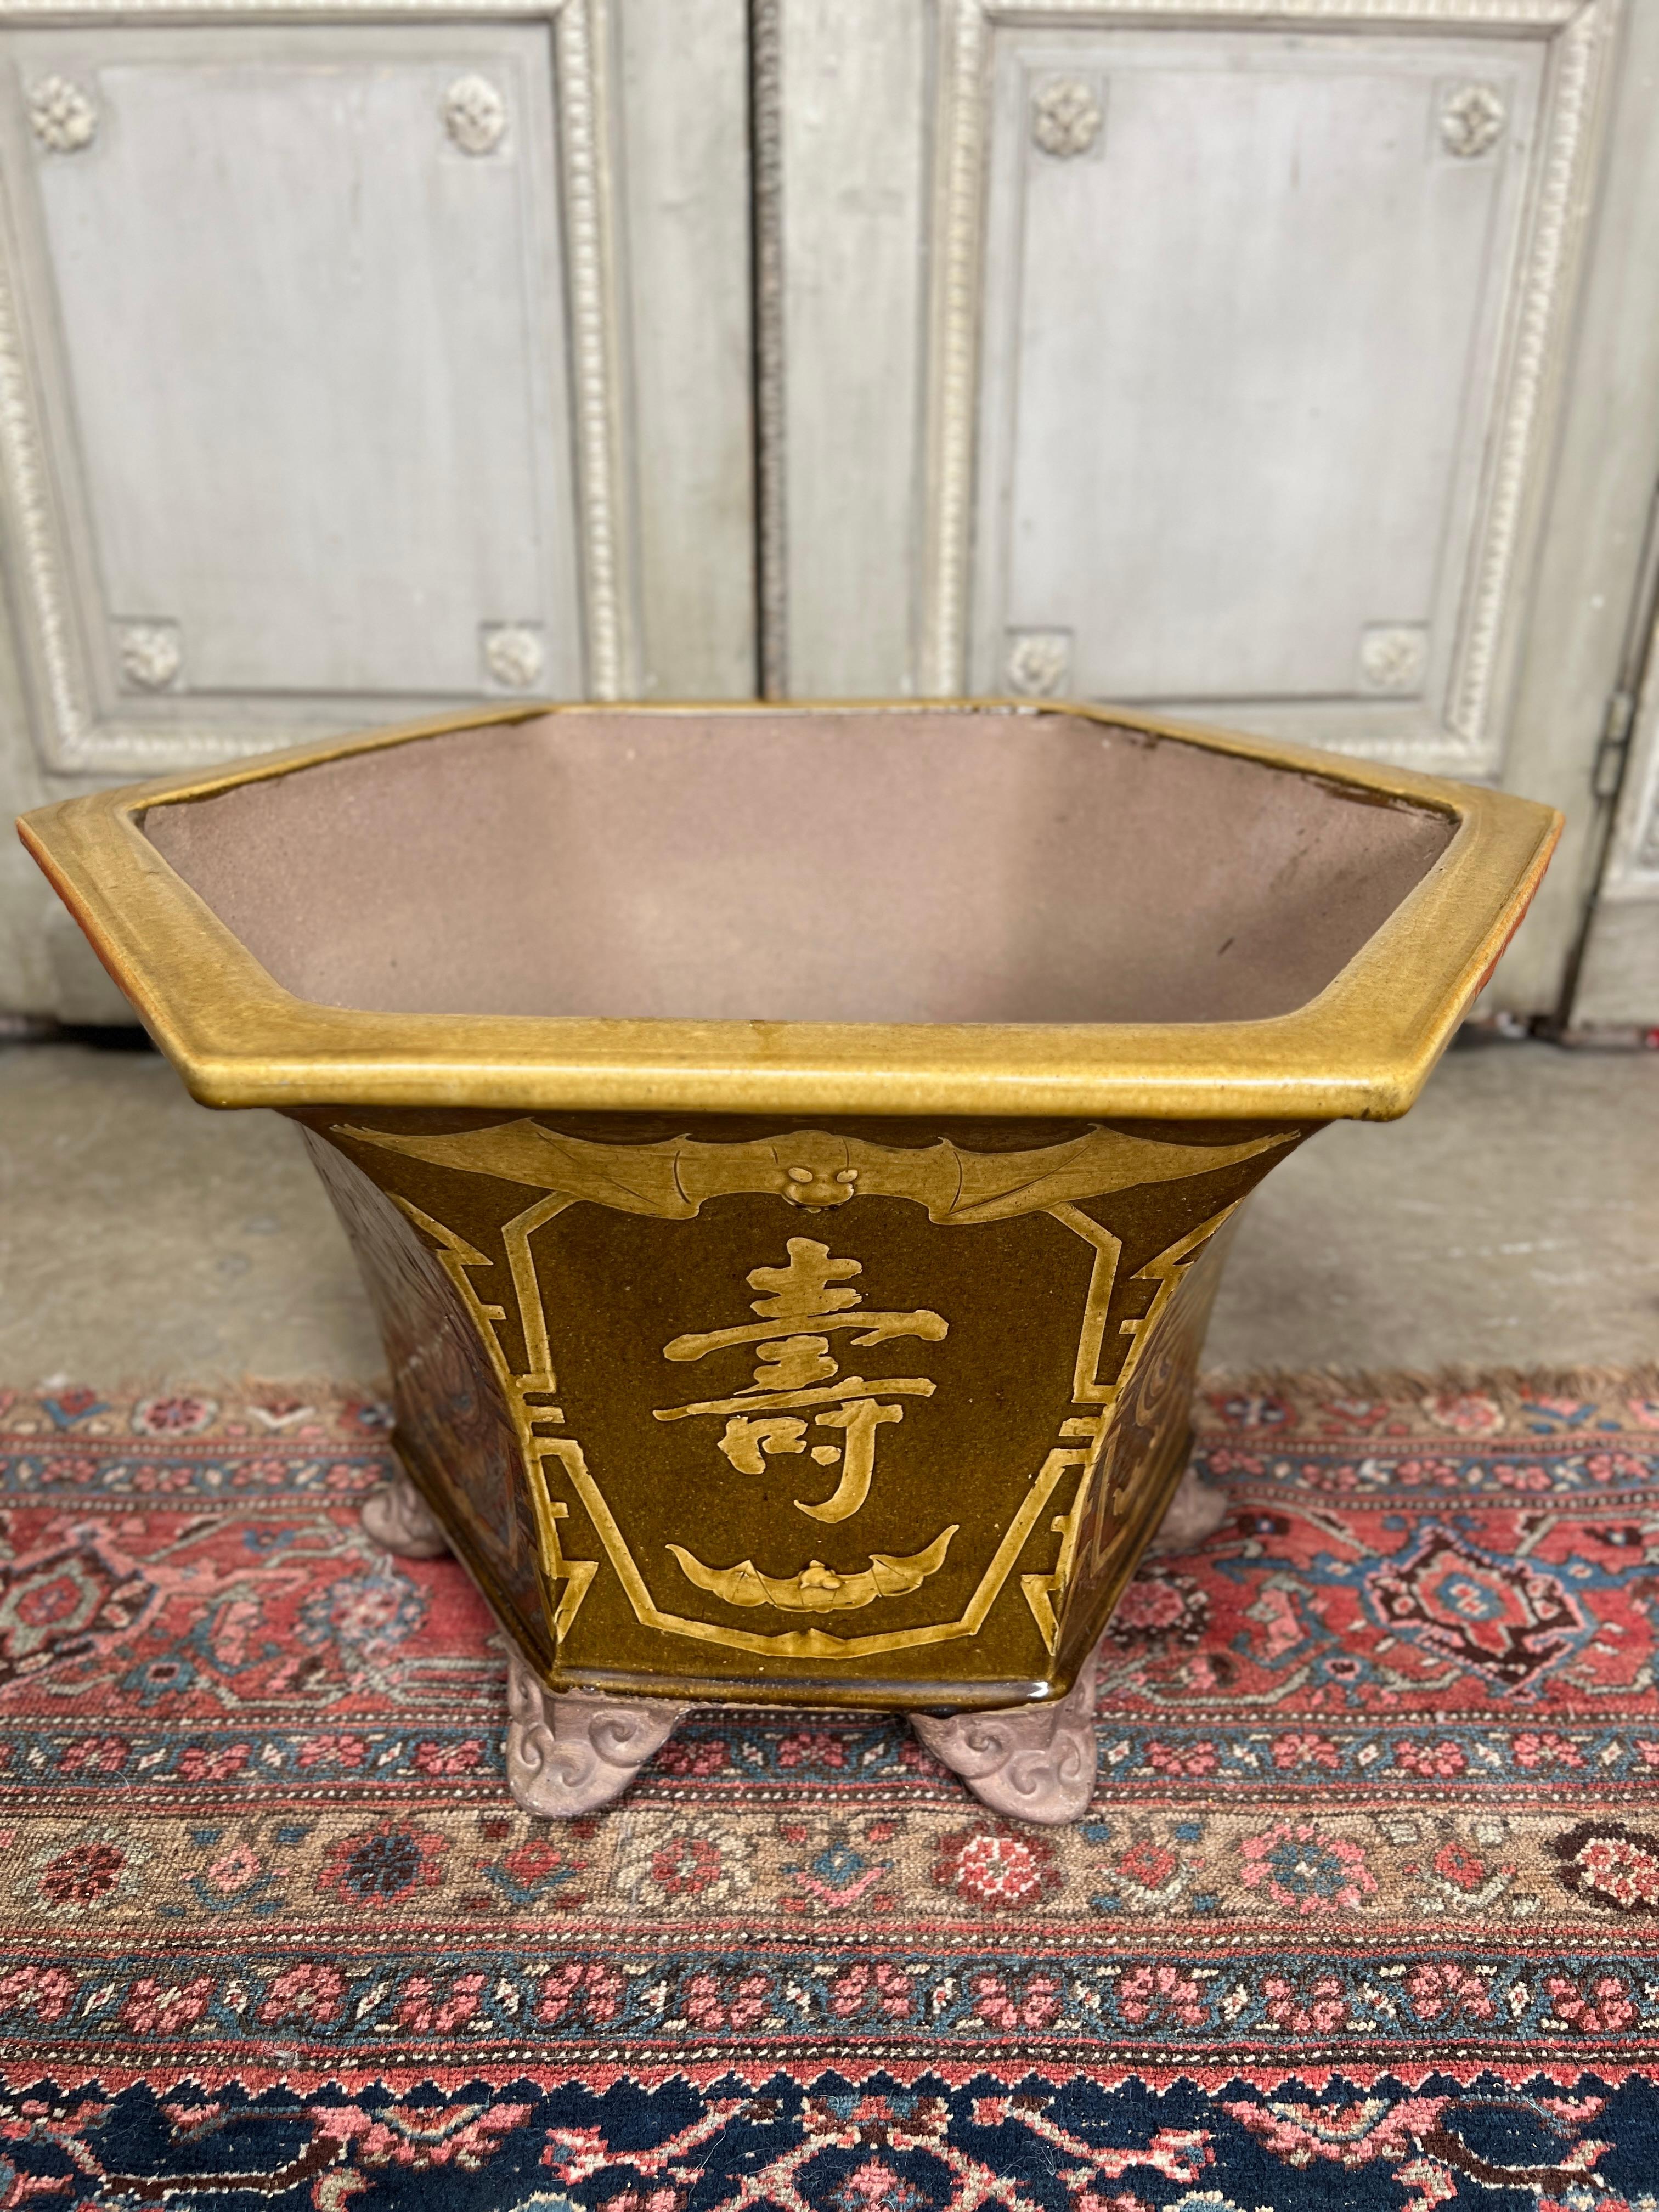 A large Chinese earthenware planter jardiniere with a brown and gold glaze.  
This late 20th century large planter is every decorative and has a bat motif.  